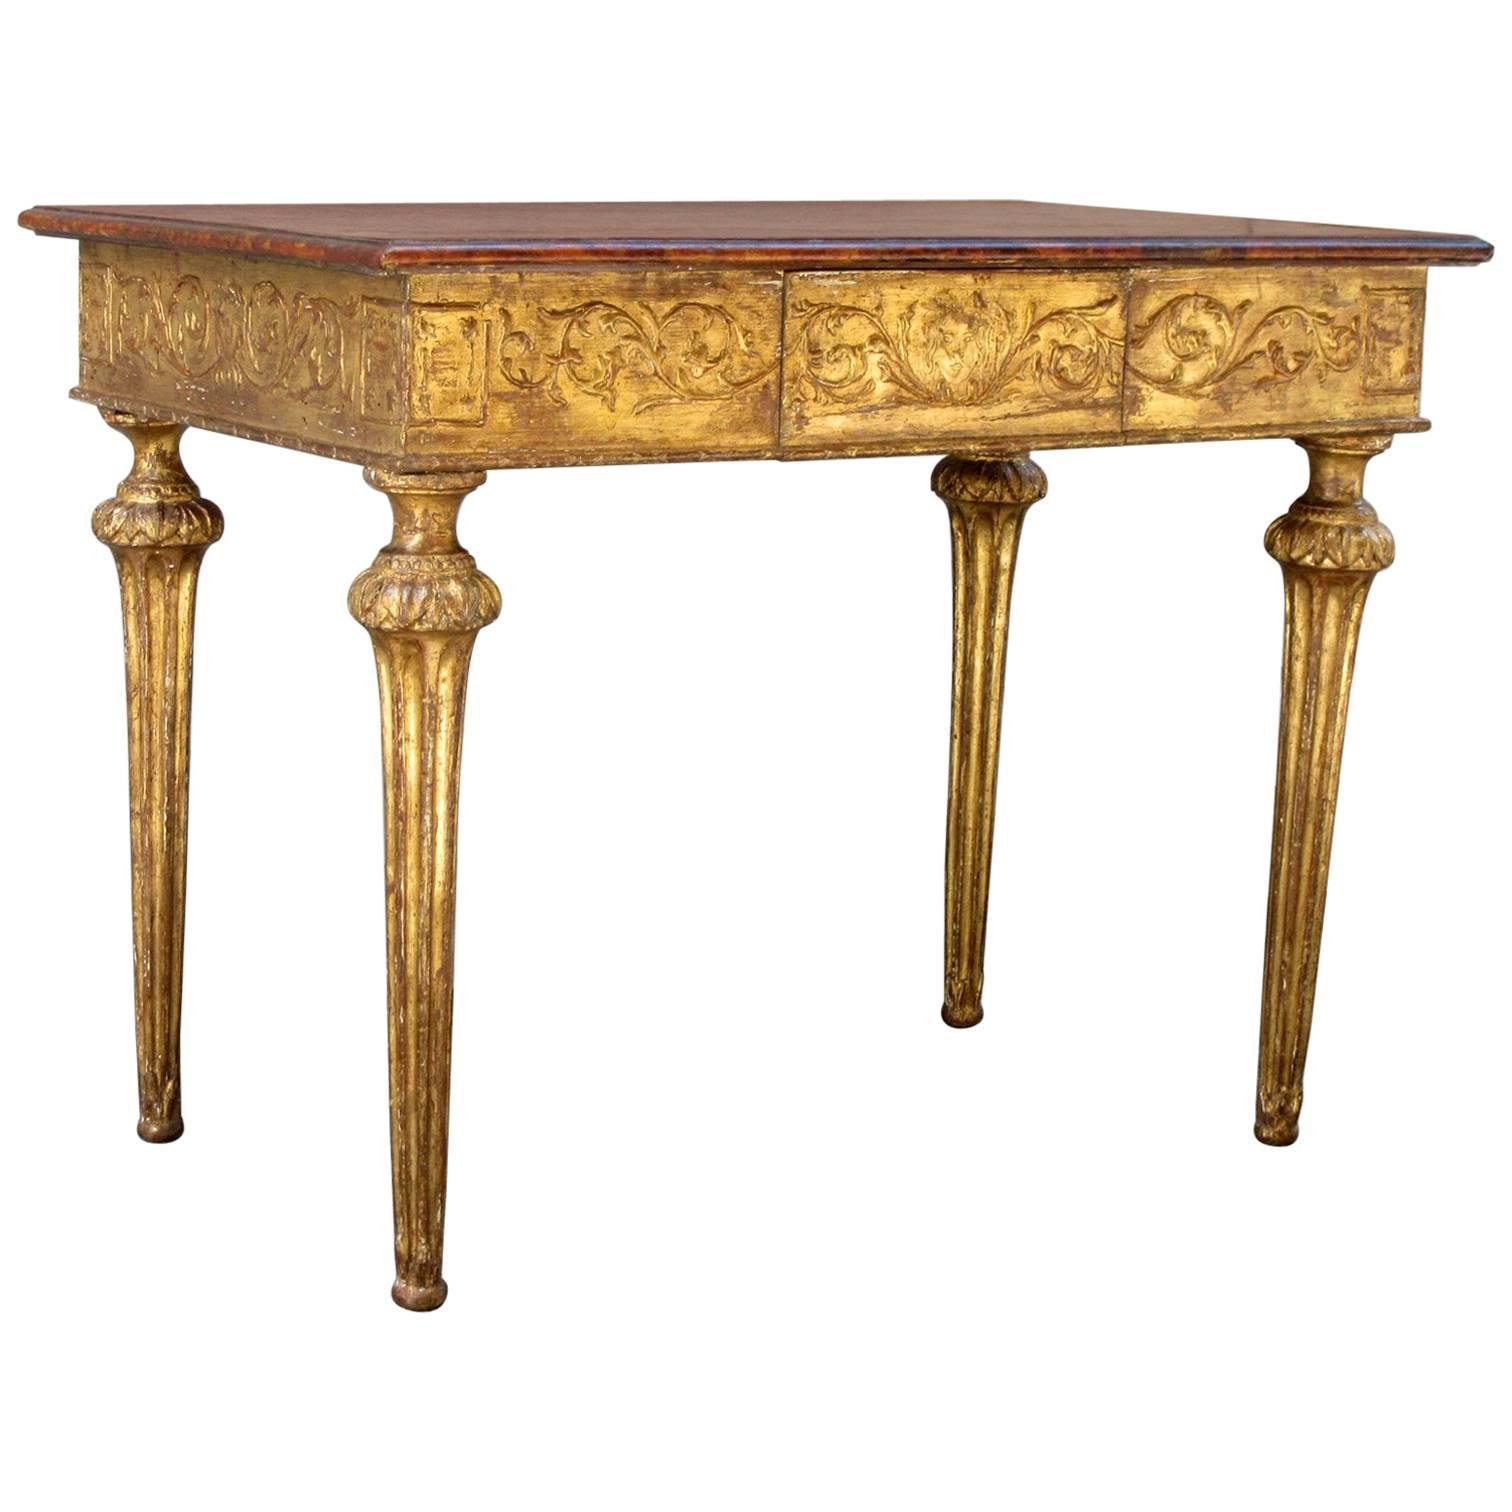 18th Century Italian Baroque Faux Marble and Giltwood Table